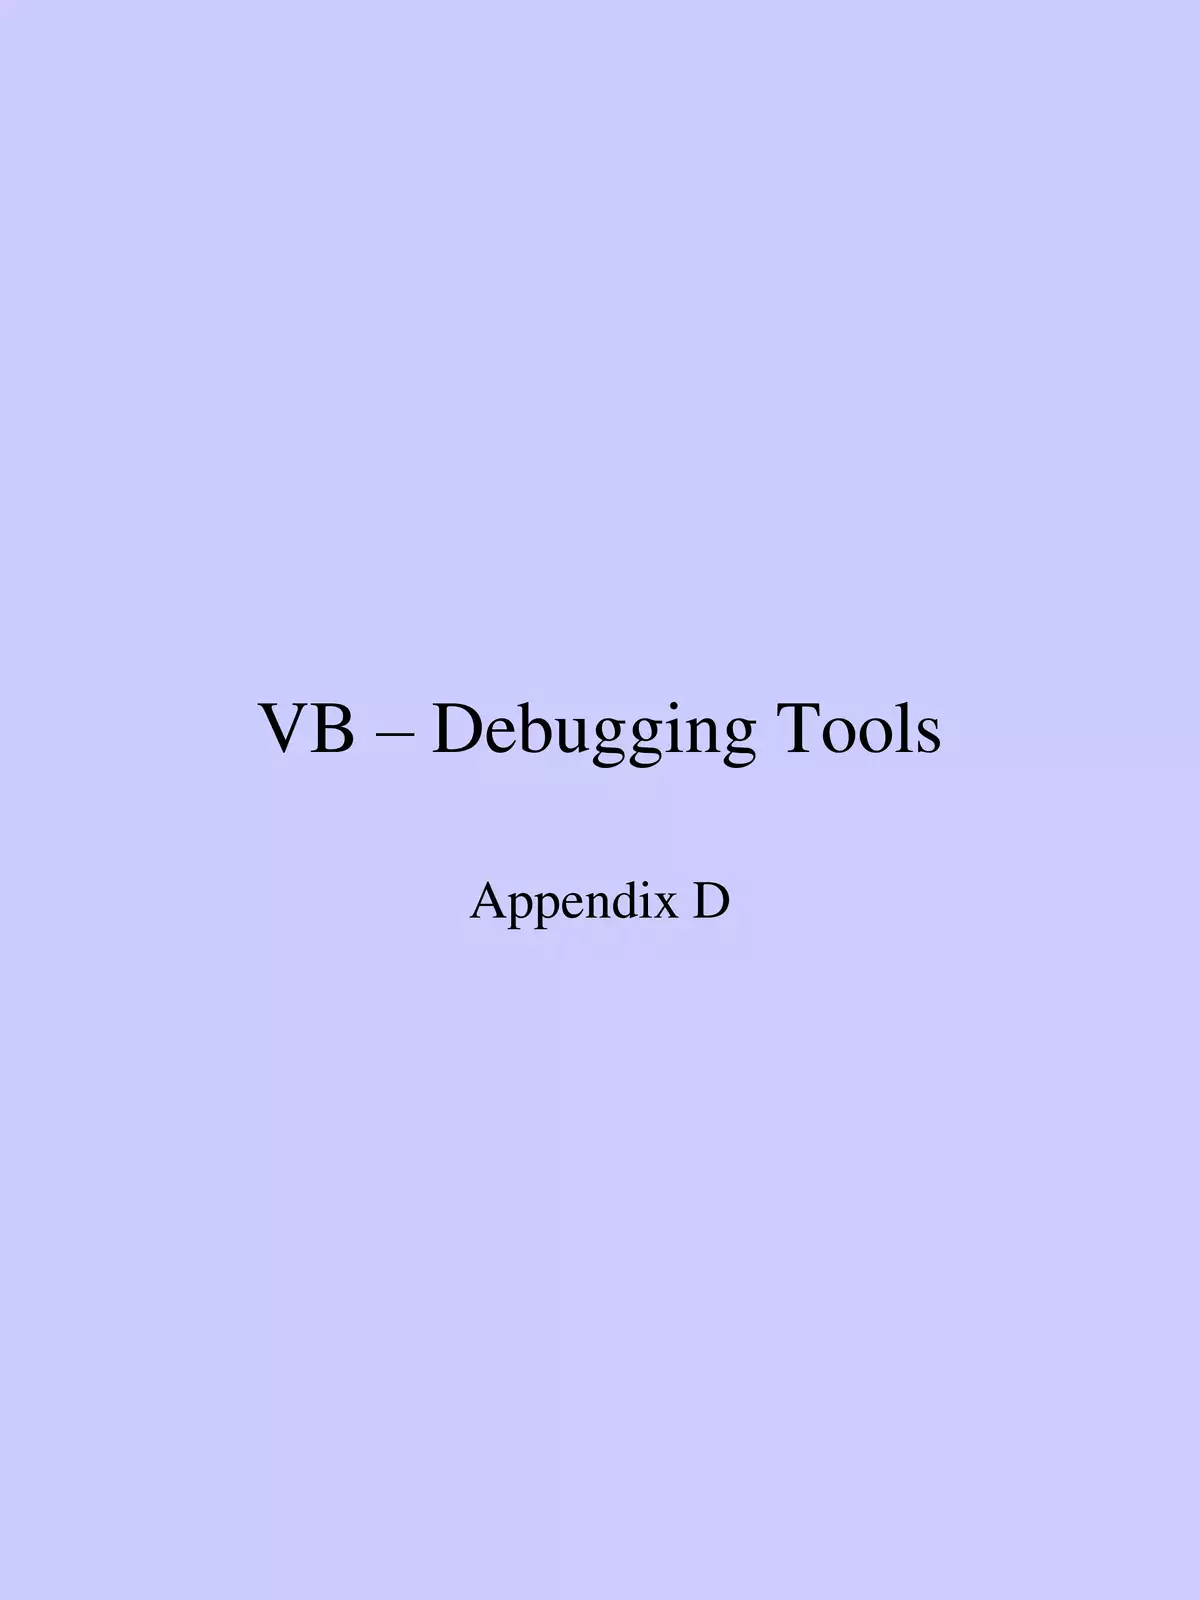 List Any Four Debugging Tools in VB